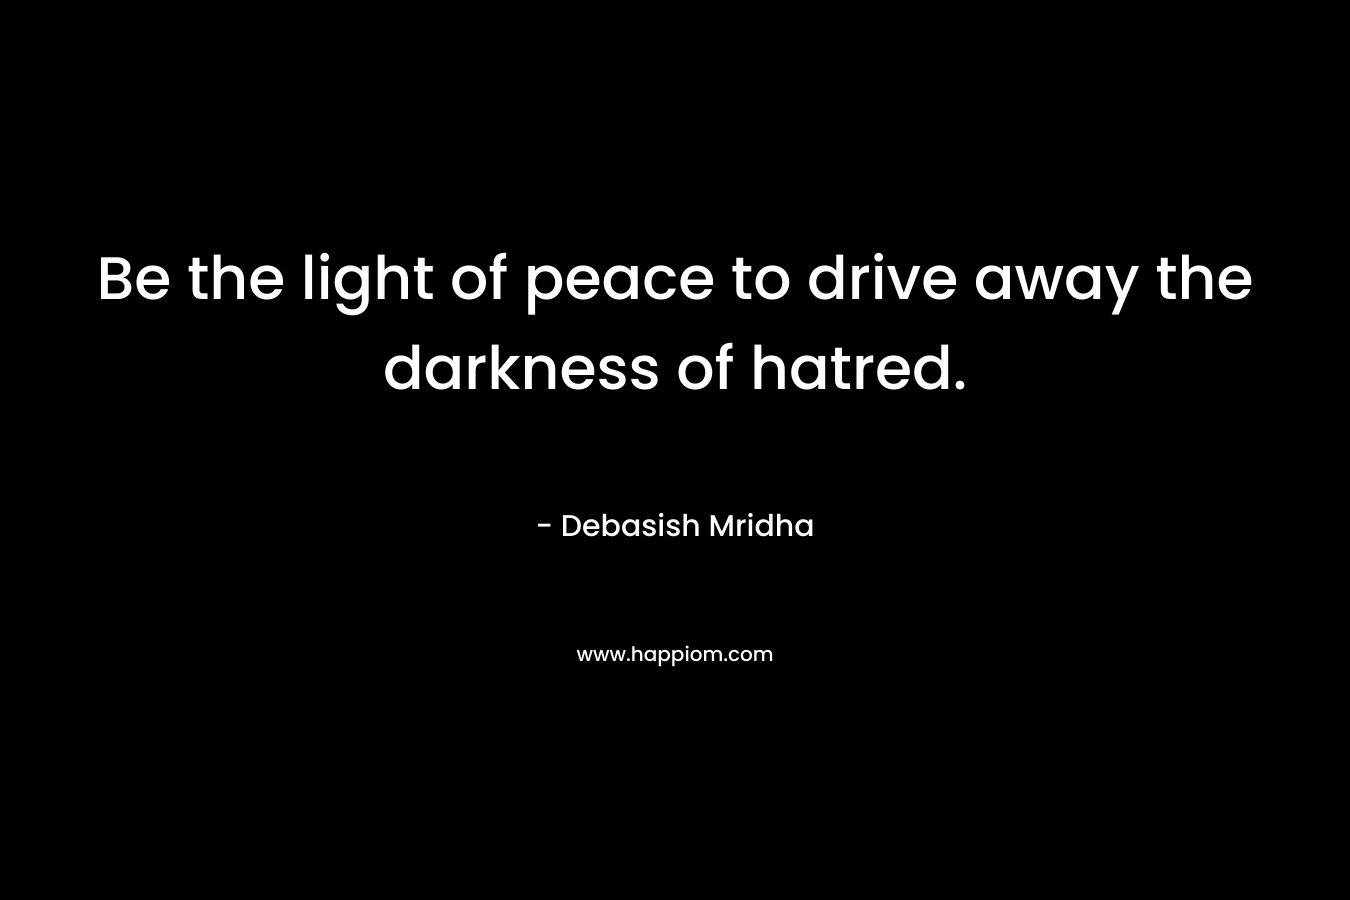 Be the light of peace to drive away the darkness of hatred.